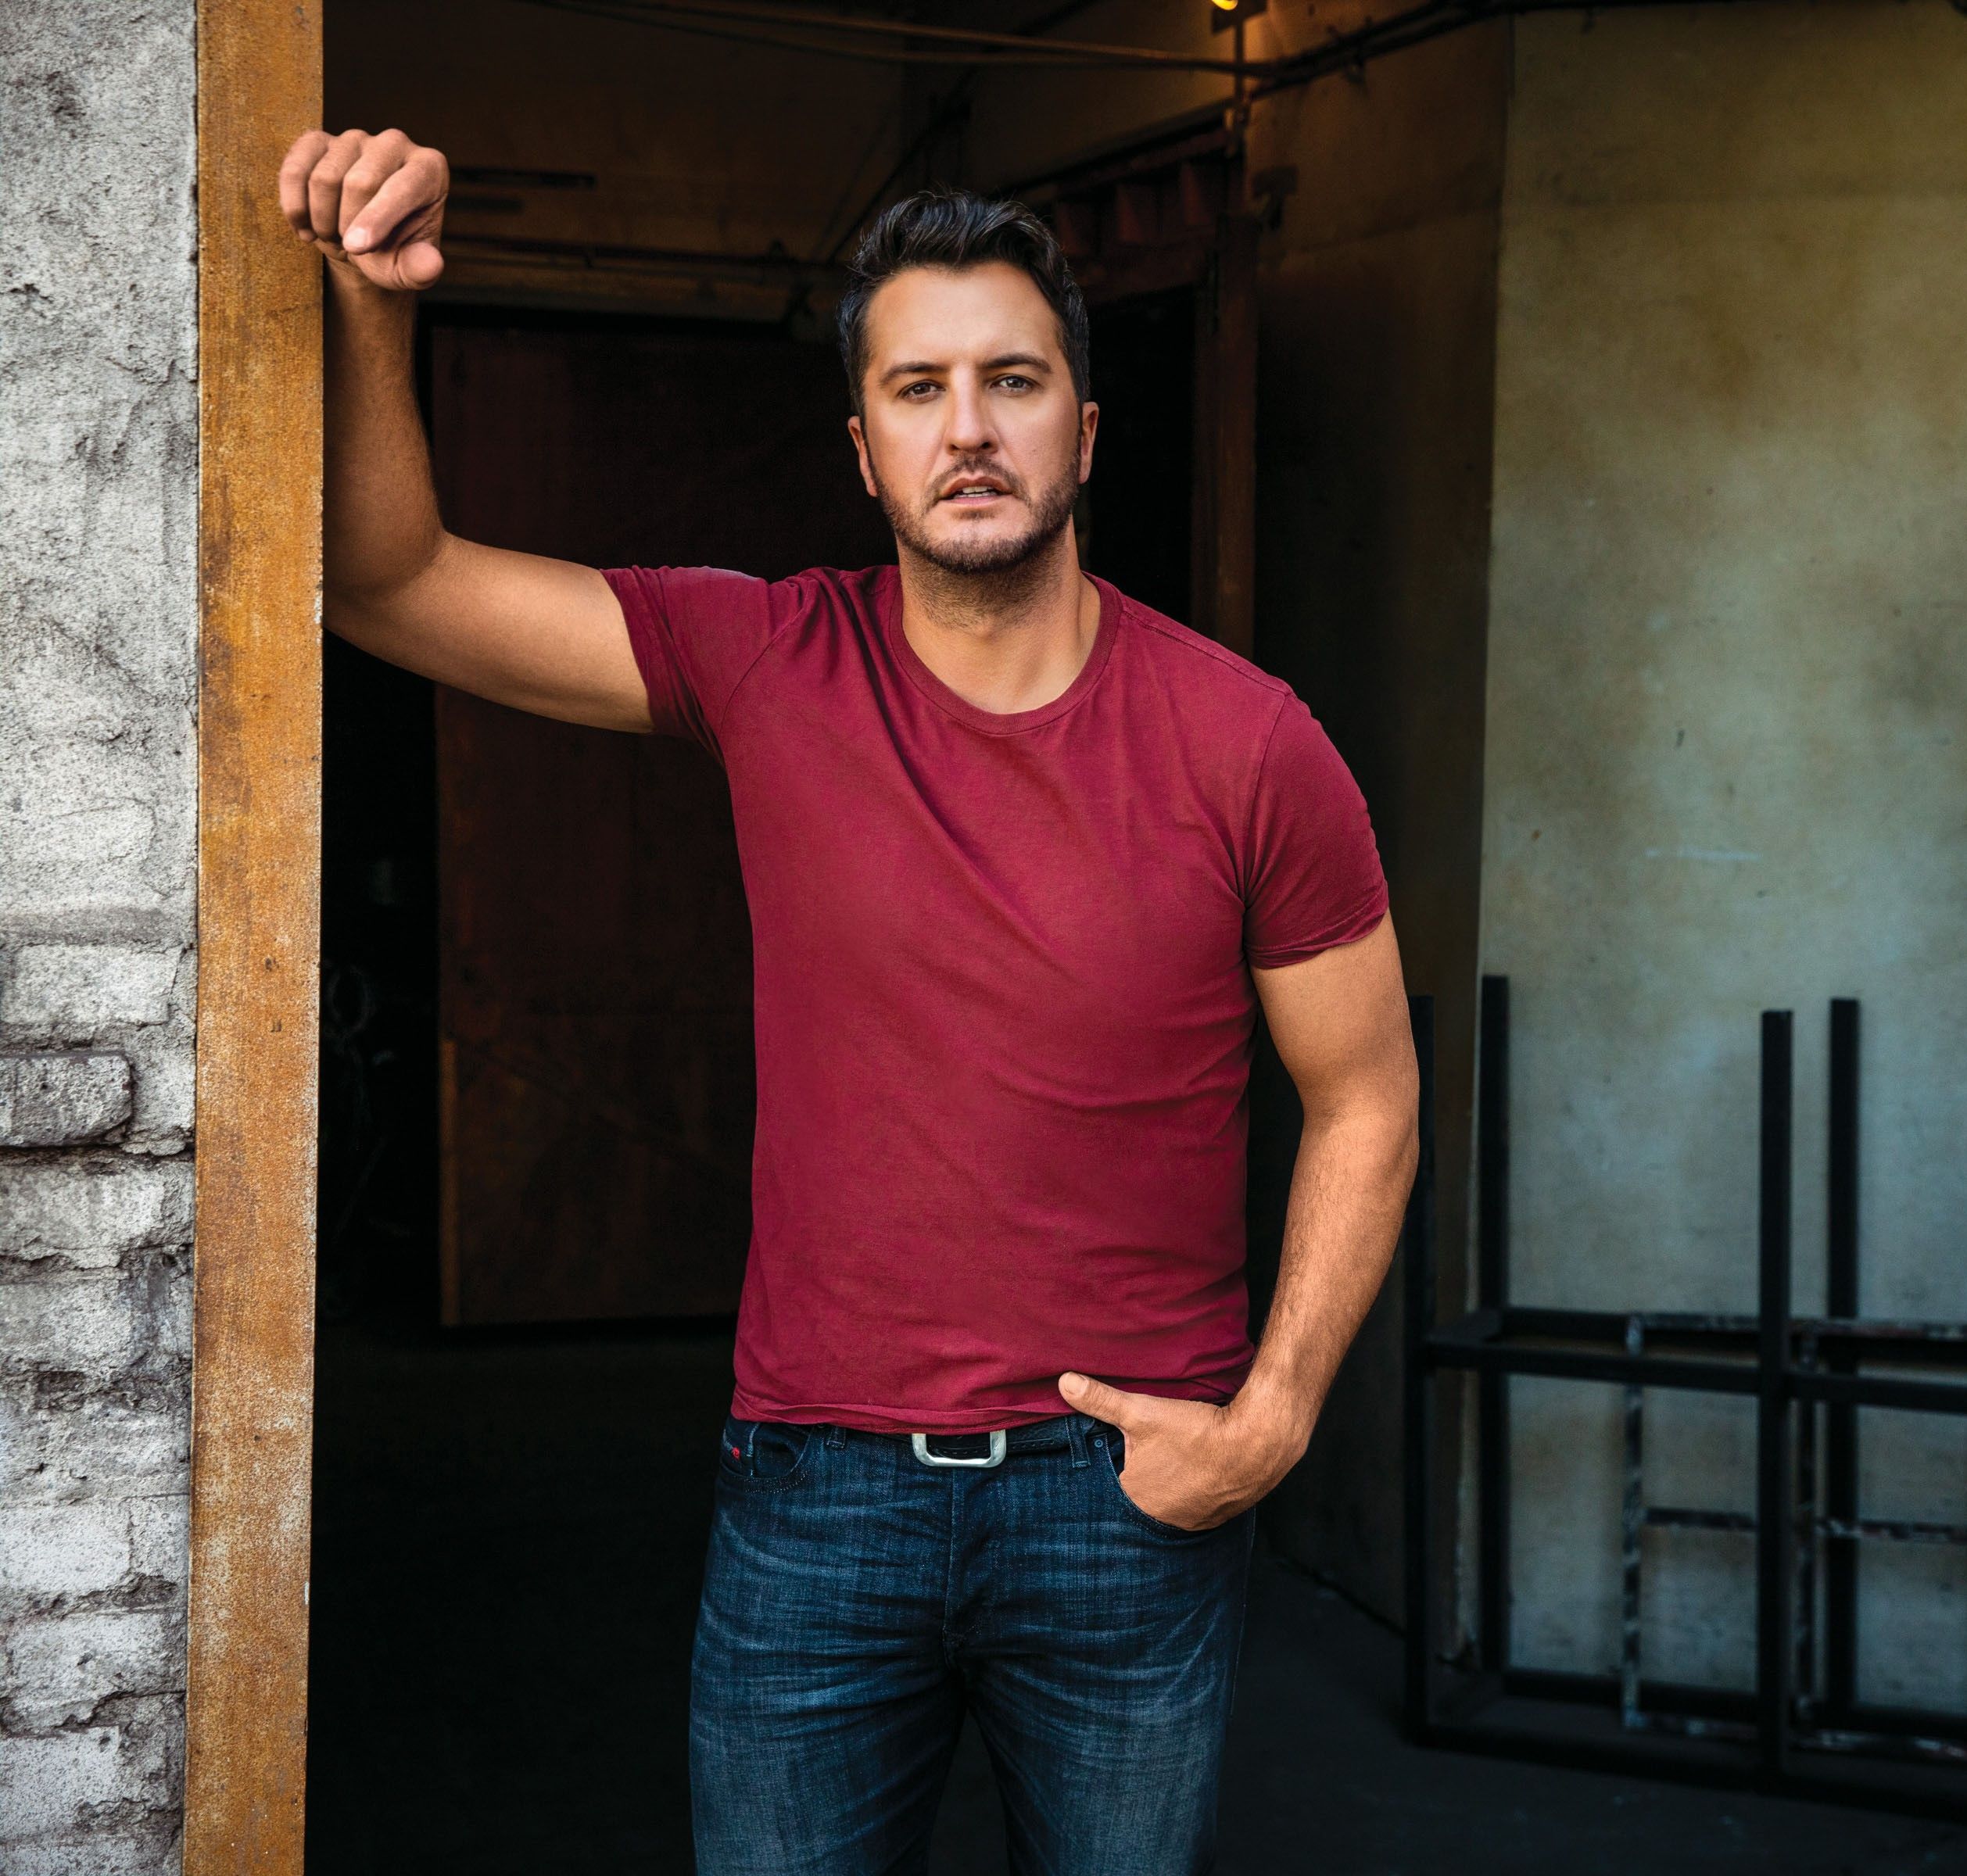 WATCH: Luke Bryan Exclusively Premiered “Down To One” Music Video on Facebook Today!